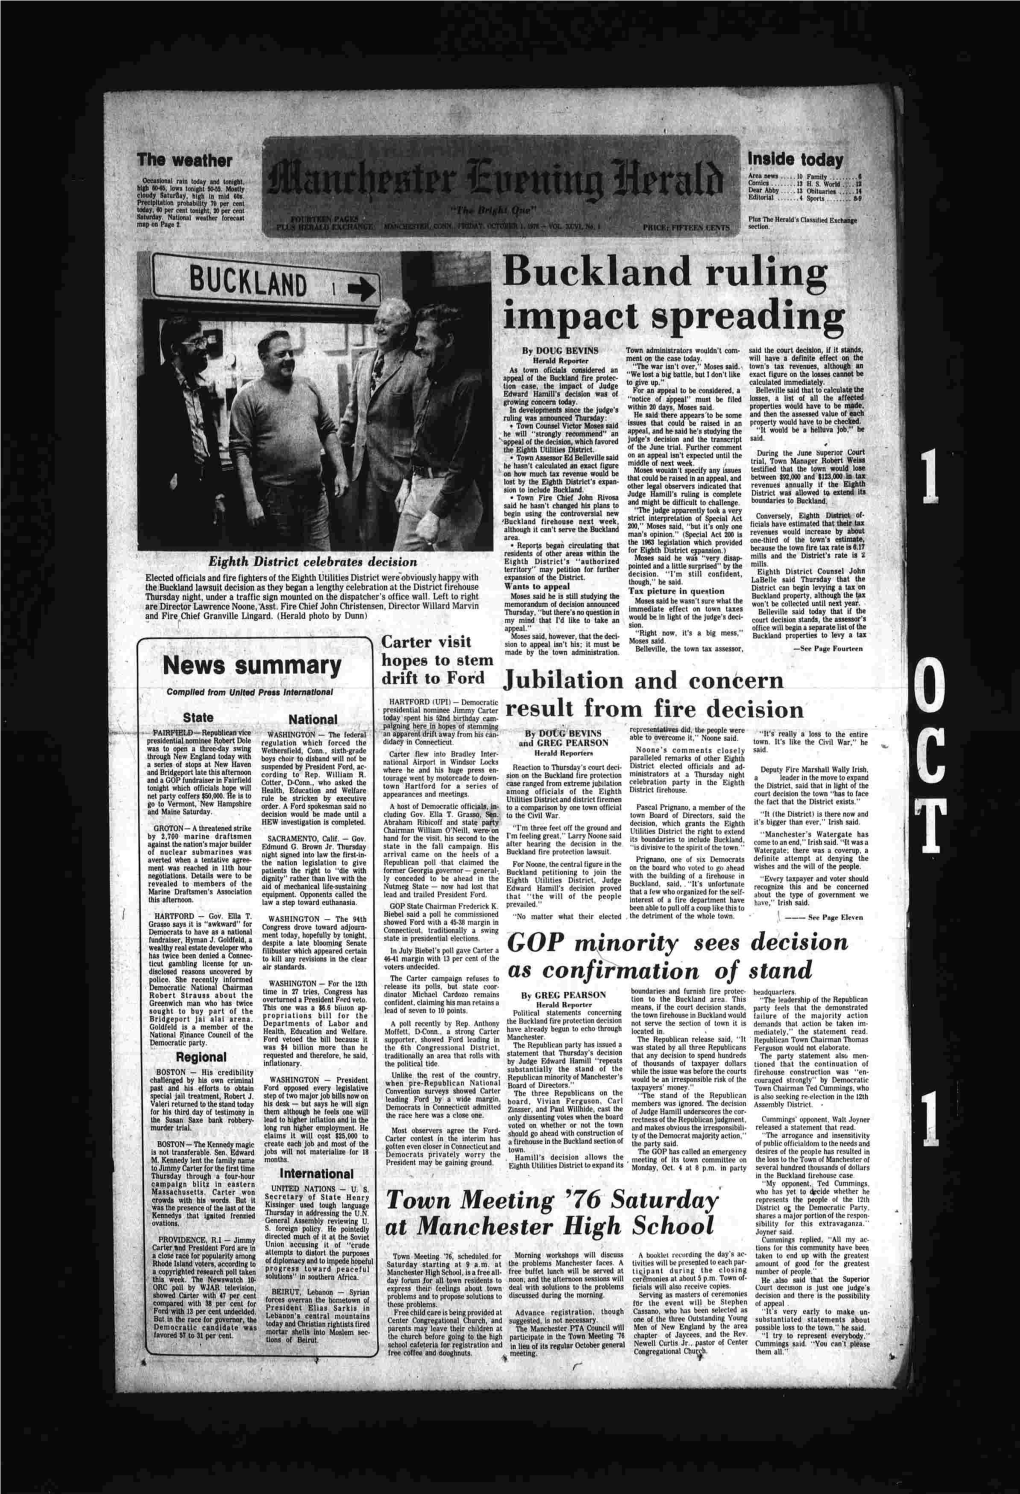 Buckland Ruling Impact Spreading by DOUG BEVINS Town Administrators Wouldn’T Com­ Said the Court Decision, If It Stands, Herald Reporter Ment on the Case Today